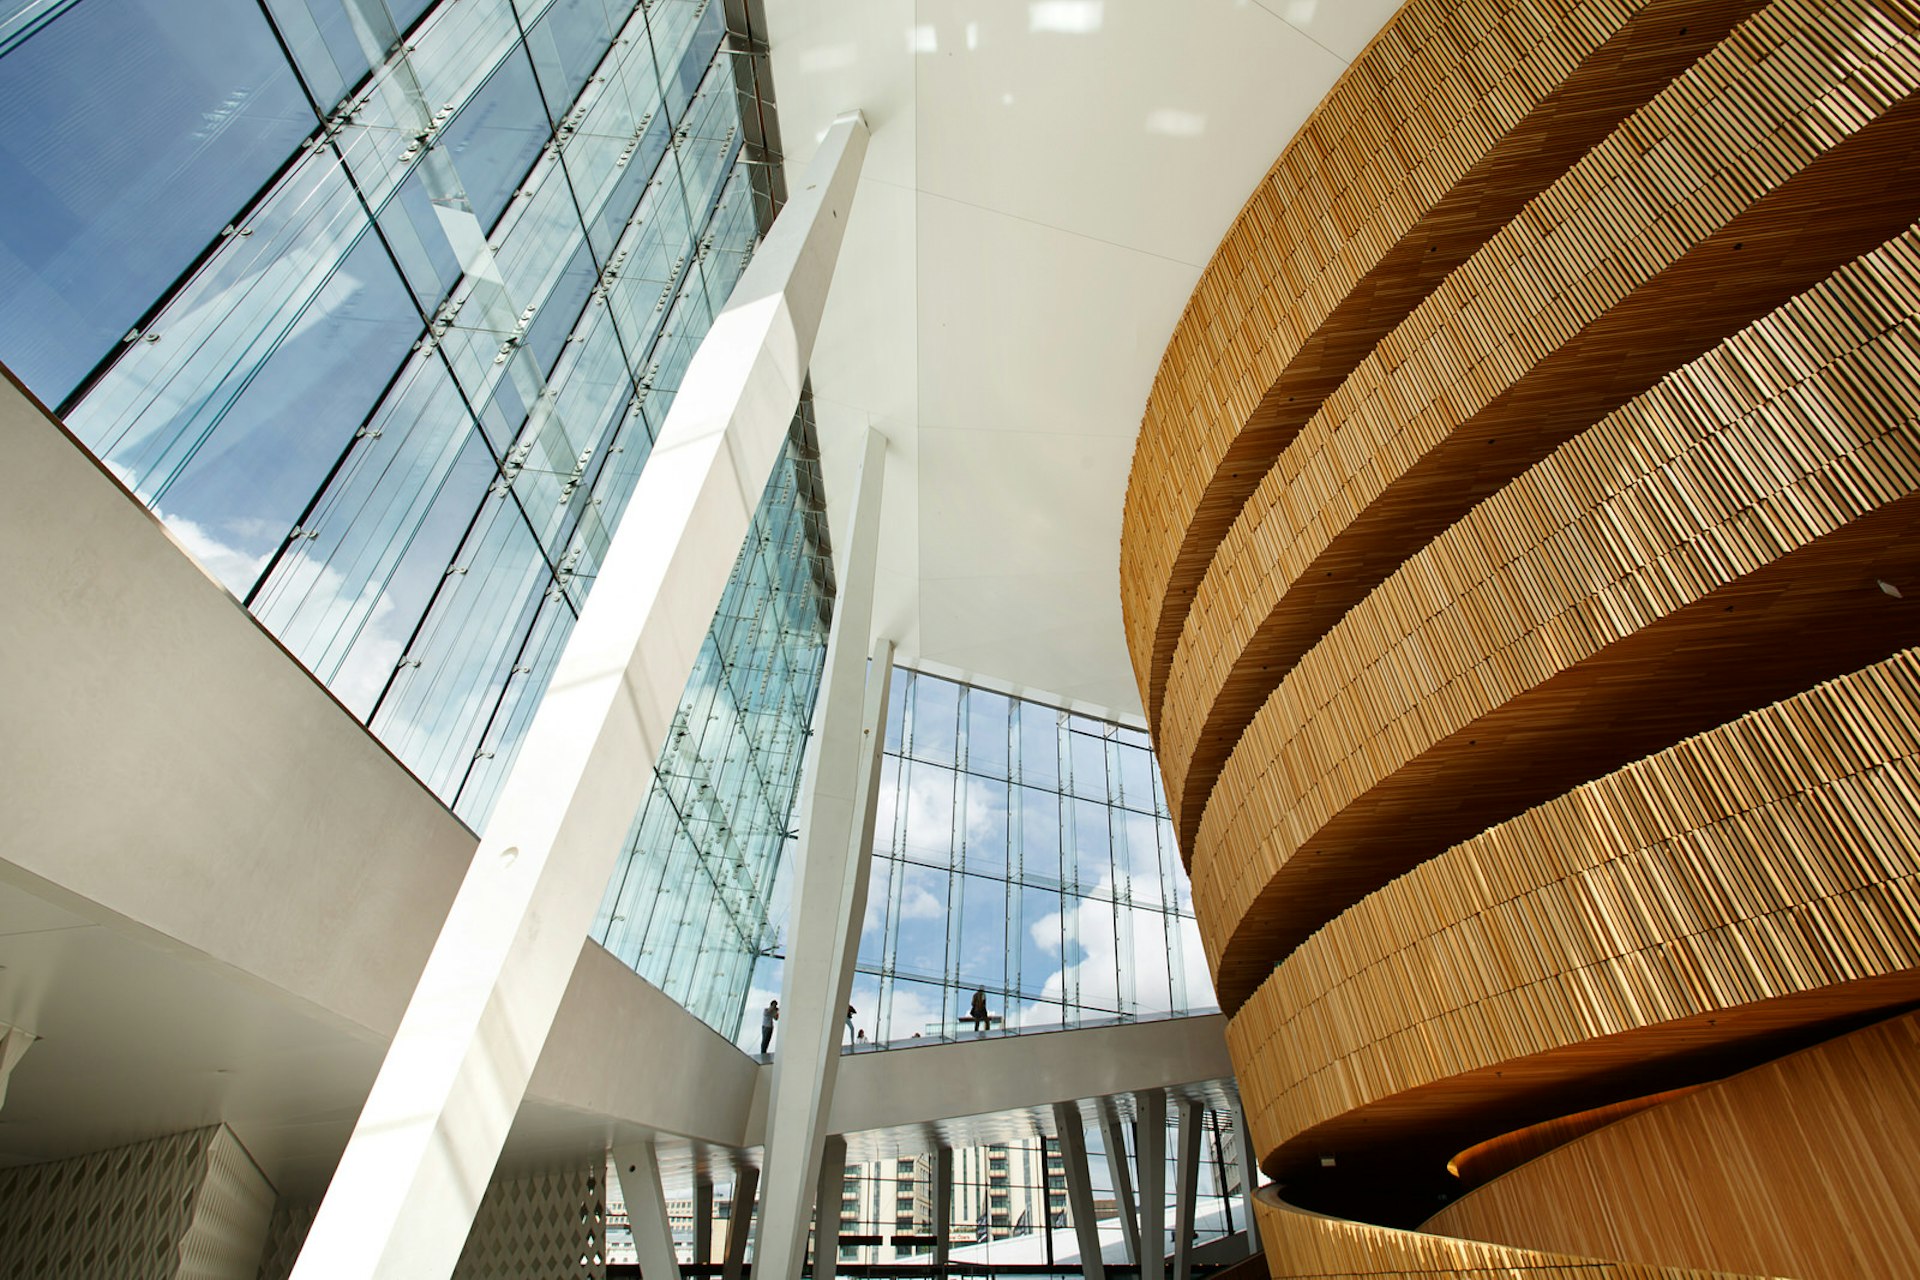 The interior of the Oslo Opera House © Tony C French / Getty Images